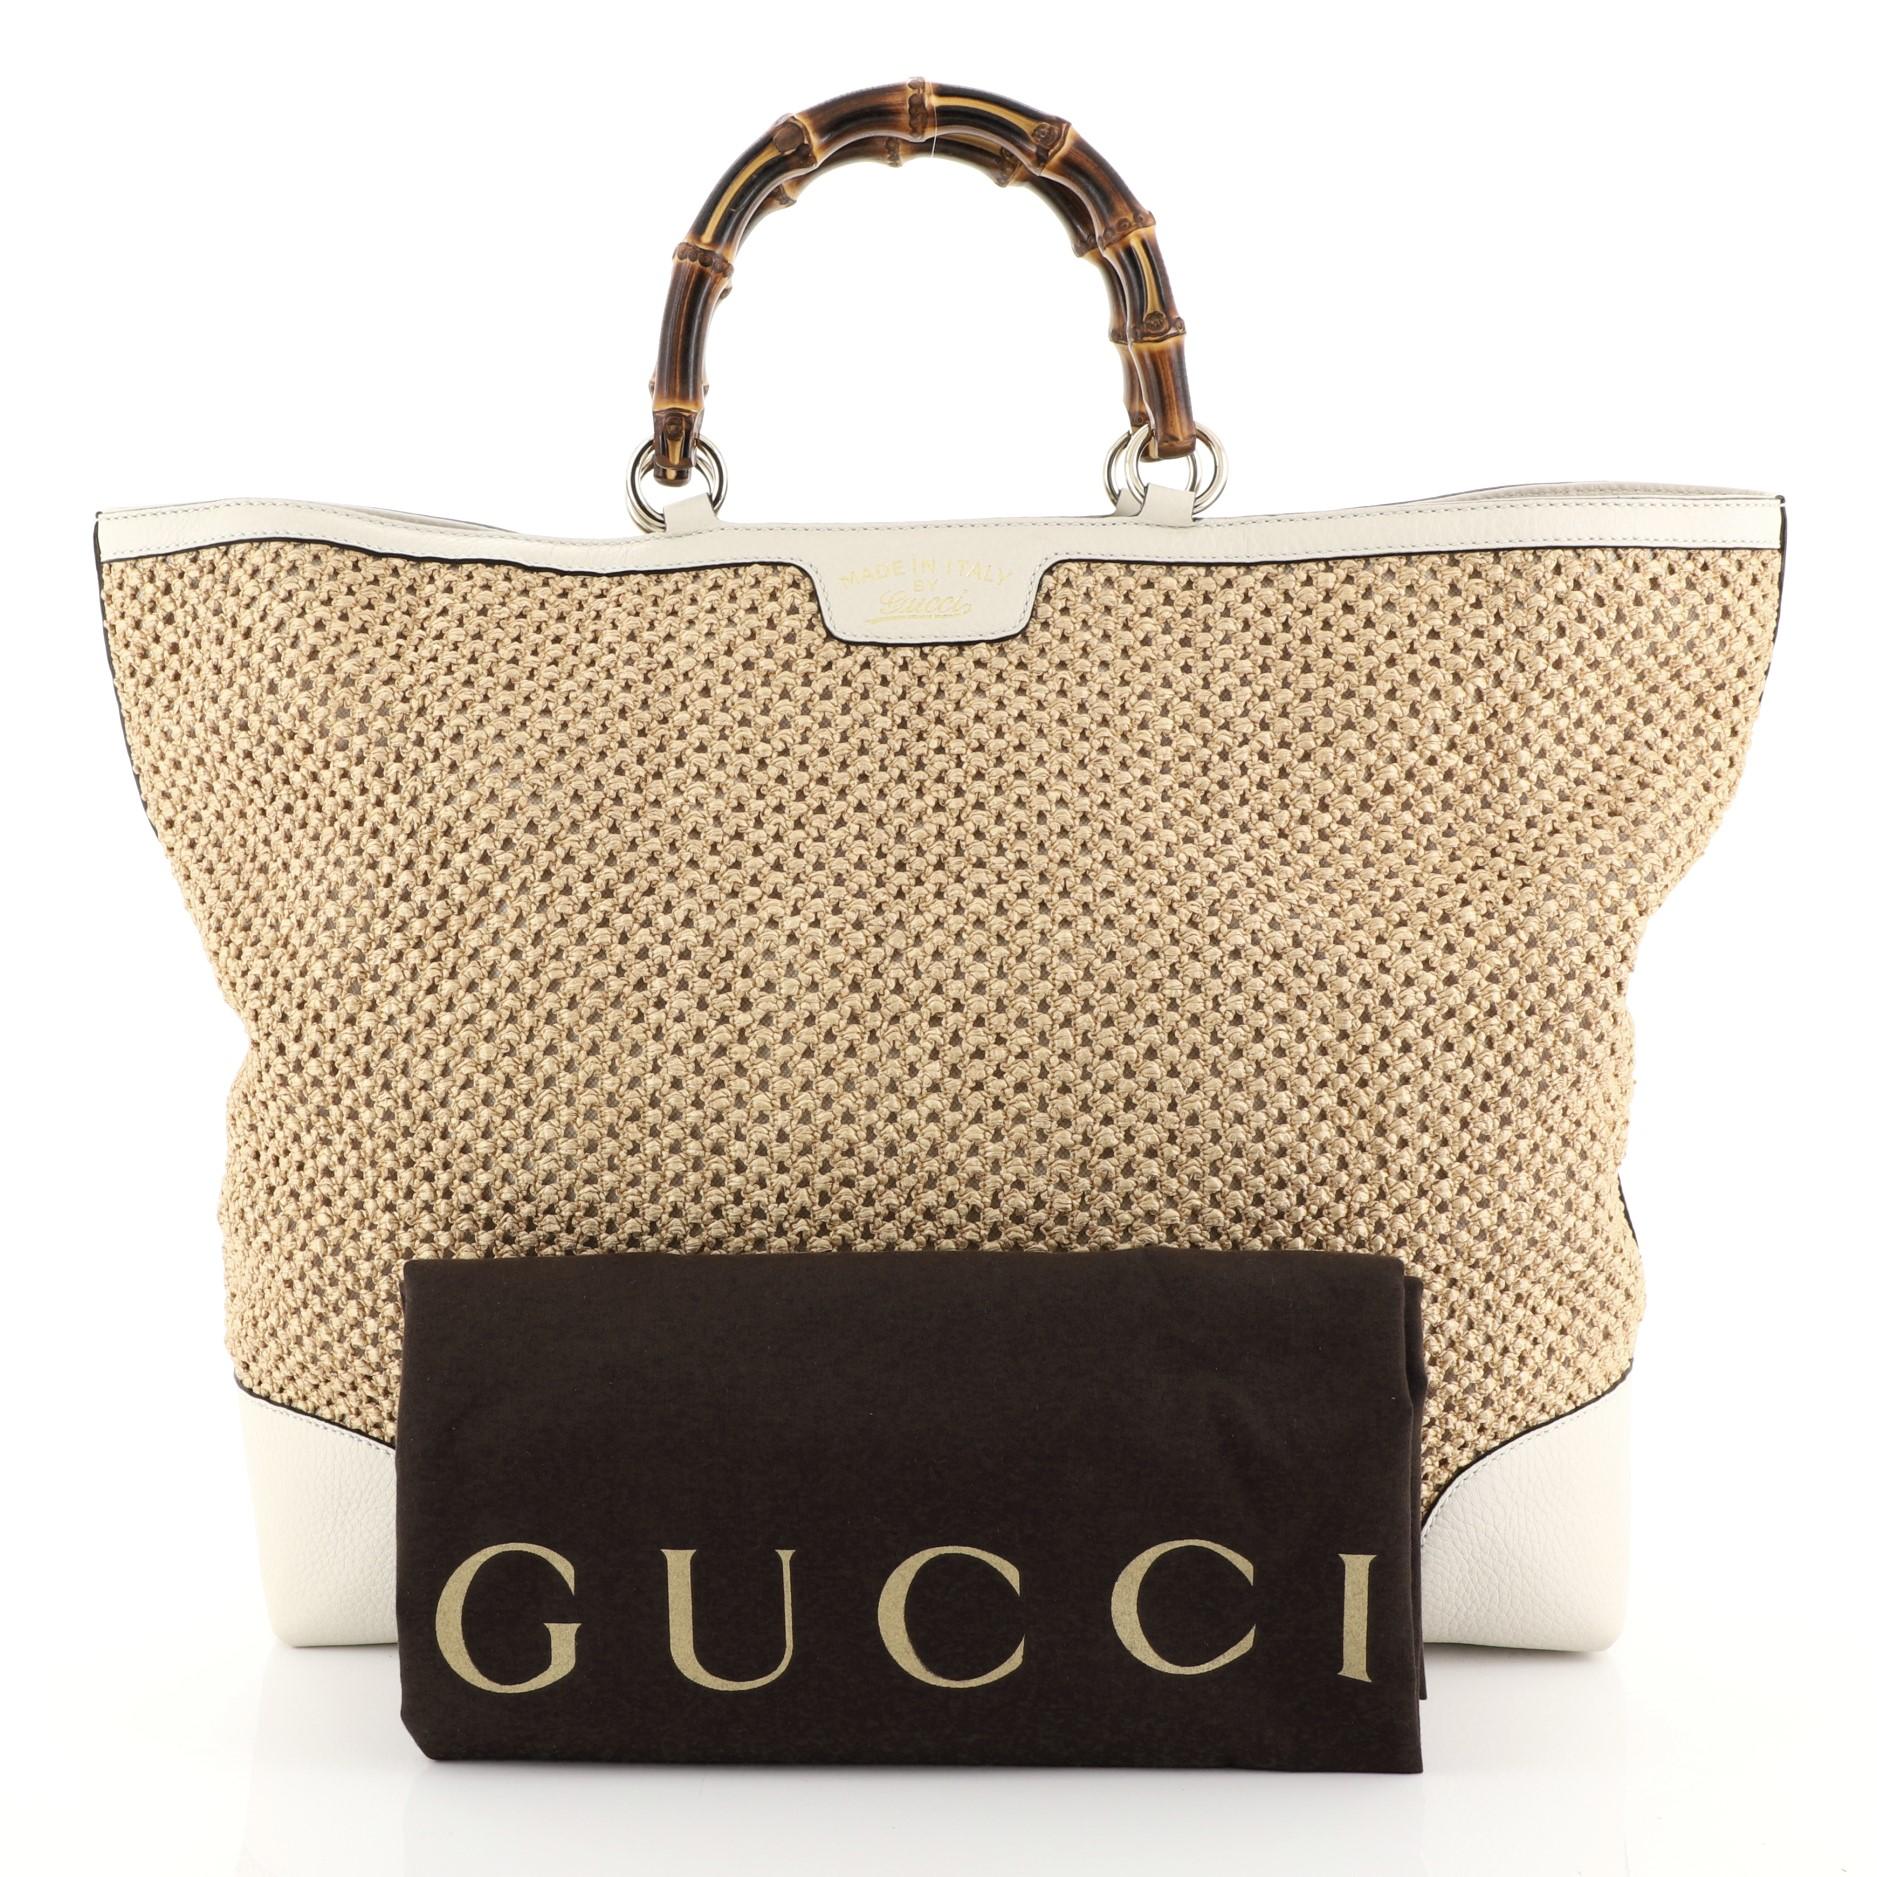 This Gucci Bamboo Shopper Tote Woven Straw Large, crafted from neutral woven straw and off-white leather, features Gucci's signature sturdy bamboo handles, and gold-tone hardware. Its hook closure opens to a neutral fabric interior with side zip and